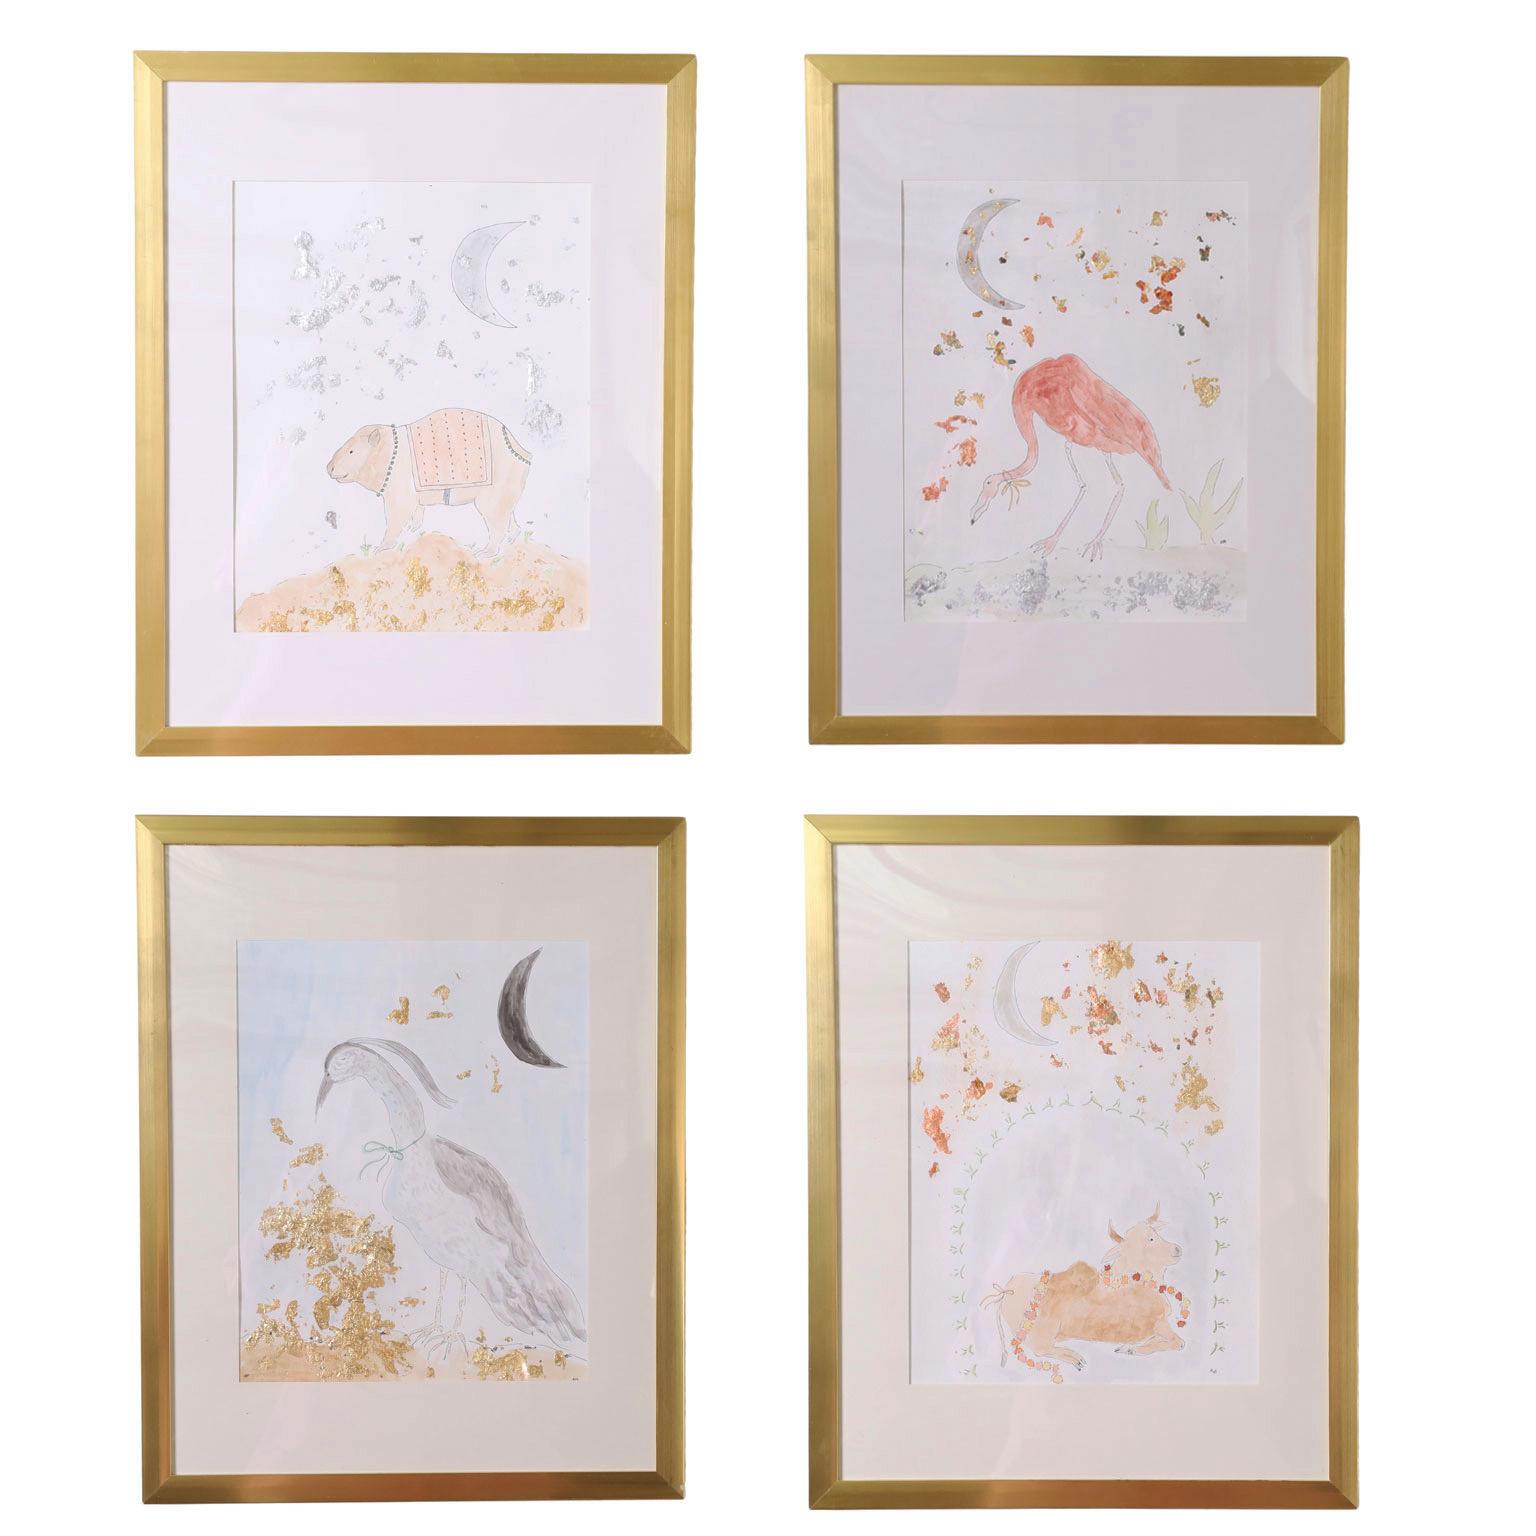 Unknown Animal Art - Set of Four Original Mixed Media Drawings of Animals